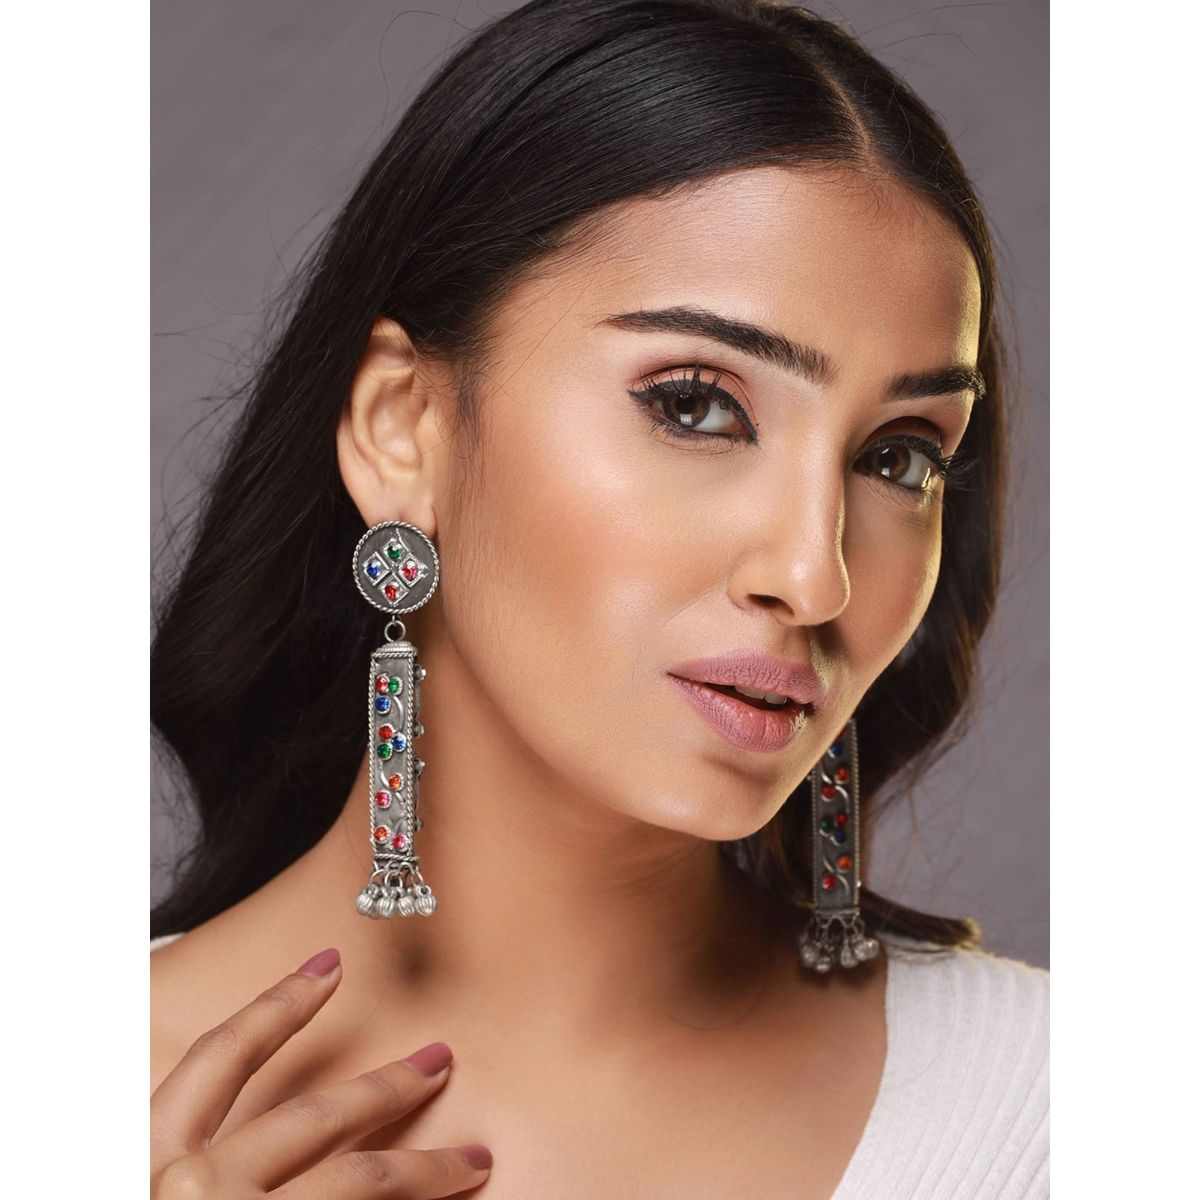 Jazz and Sizzle GoldToned Set of 3 Contemporary Hoop and Drop Earrings  Buy Jazz and Sizzle GoldToned Set of 3 Contemporary Hoop and Drop Earrings  Online at Best Price in India 